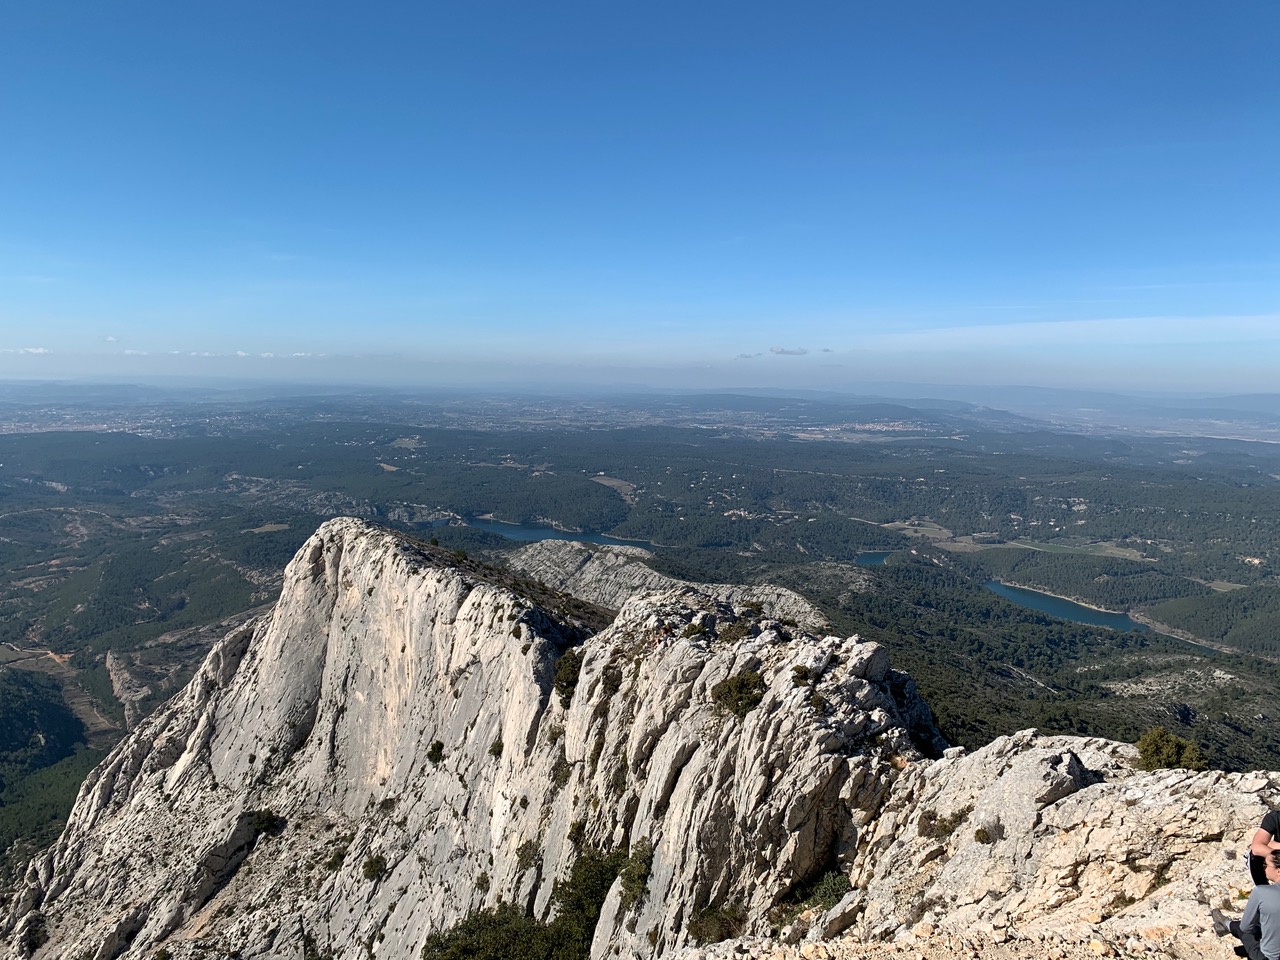 The rocky top of Montagne Sainte-Victoire and the view beyond